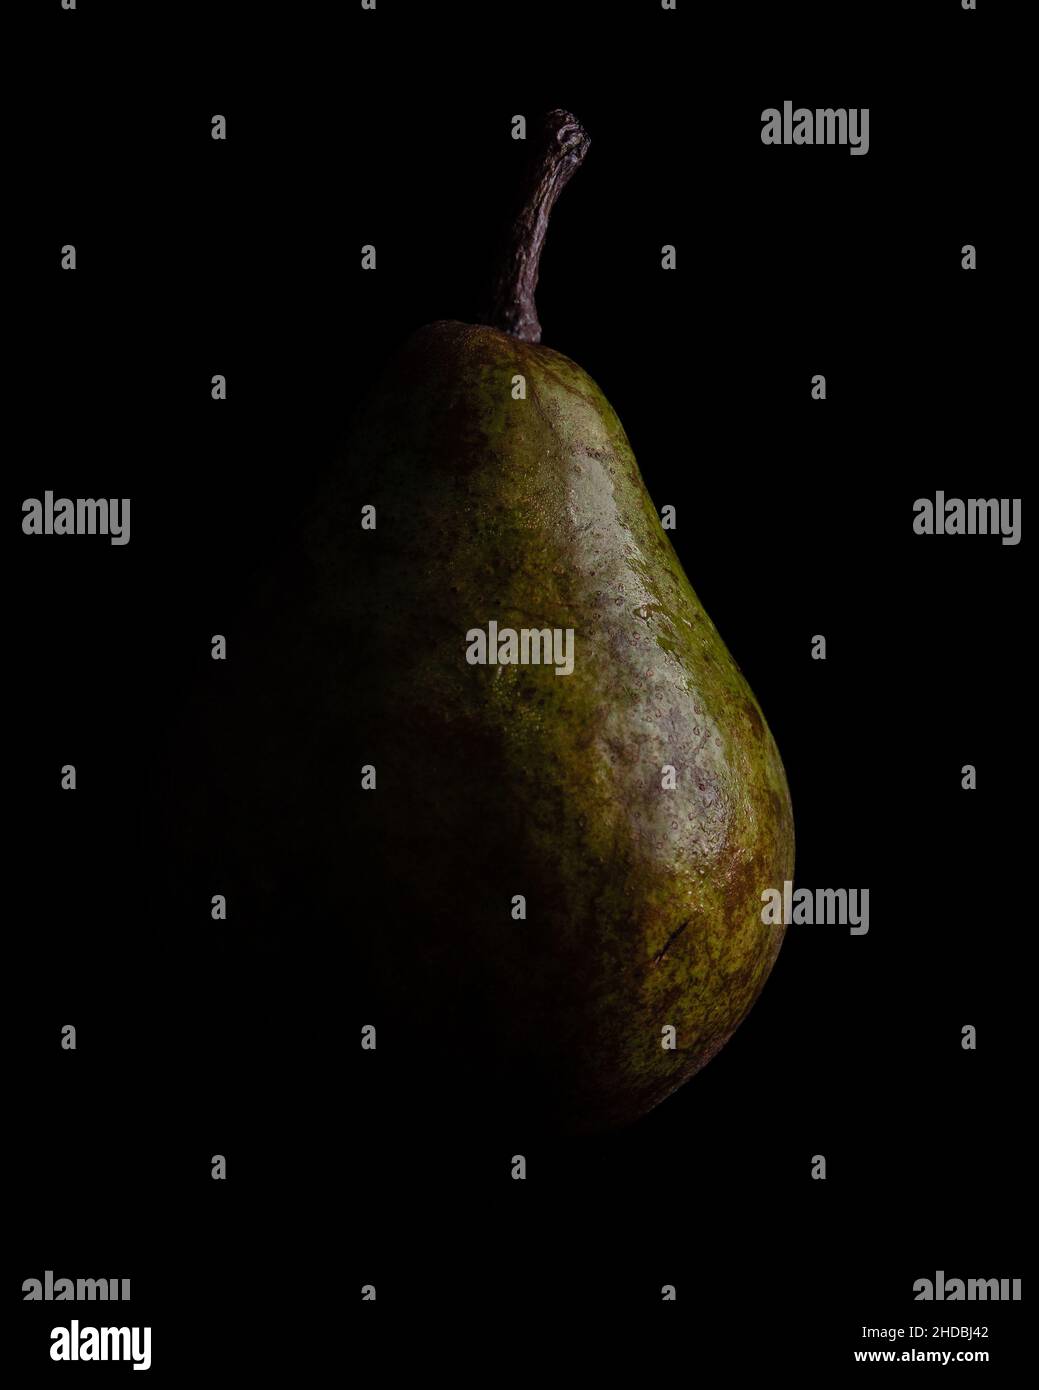 Vertical of a green pear darkened from the left side isolated on a black background Stock Photo